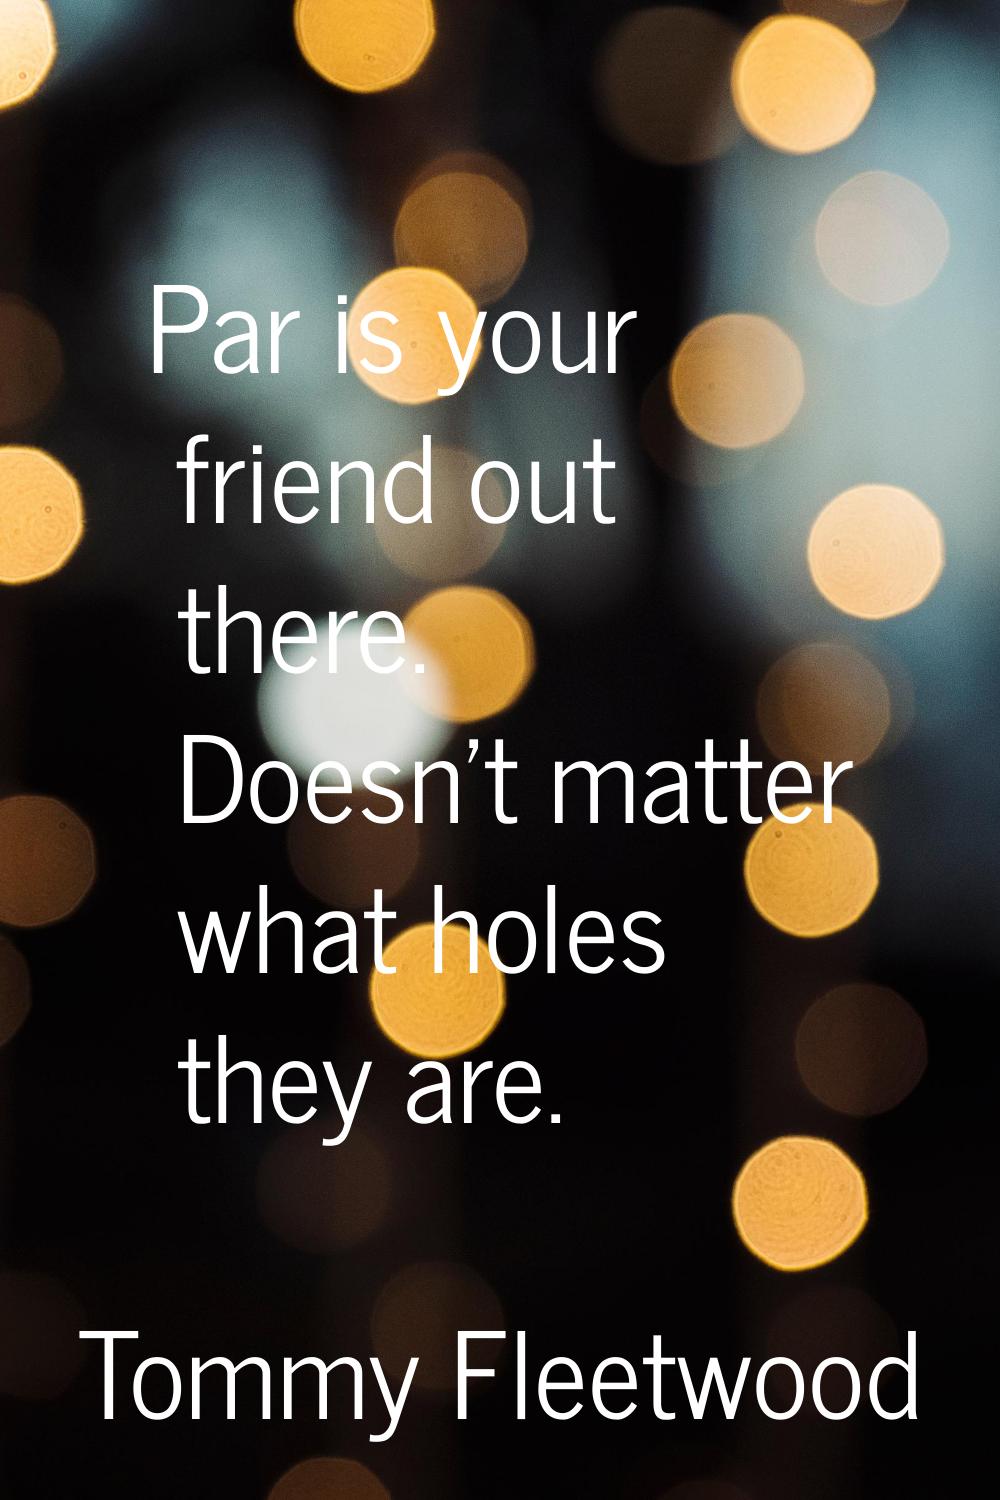 Par is your friend out there. Doesn't matter what holes they are.